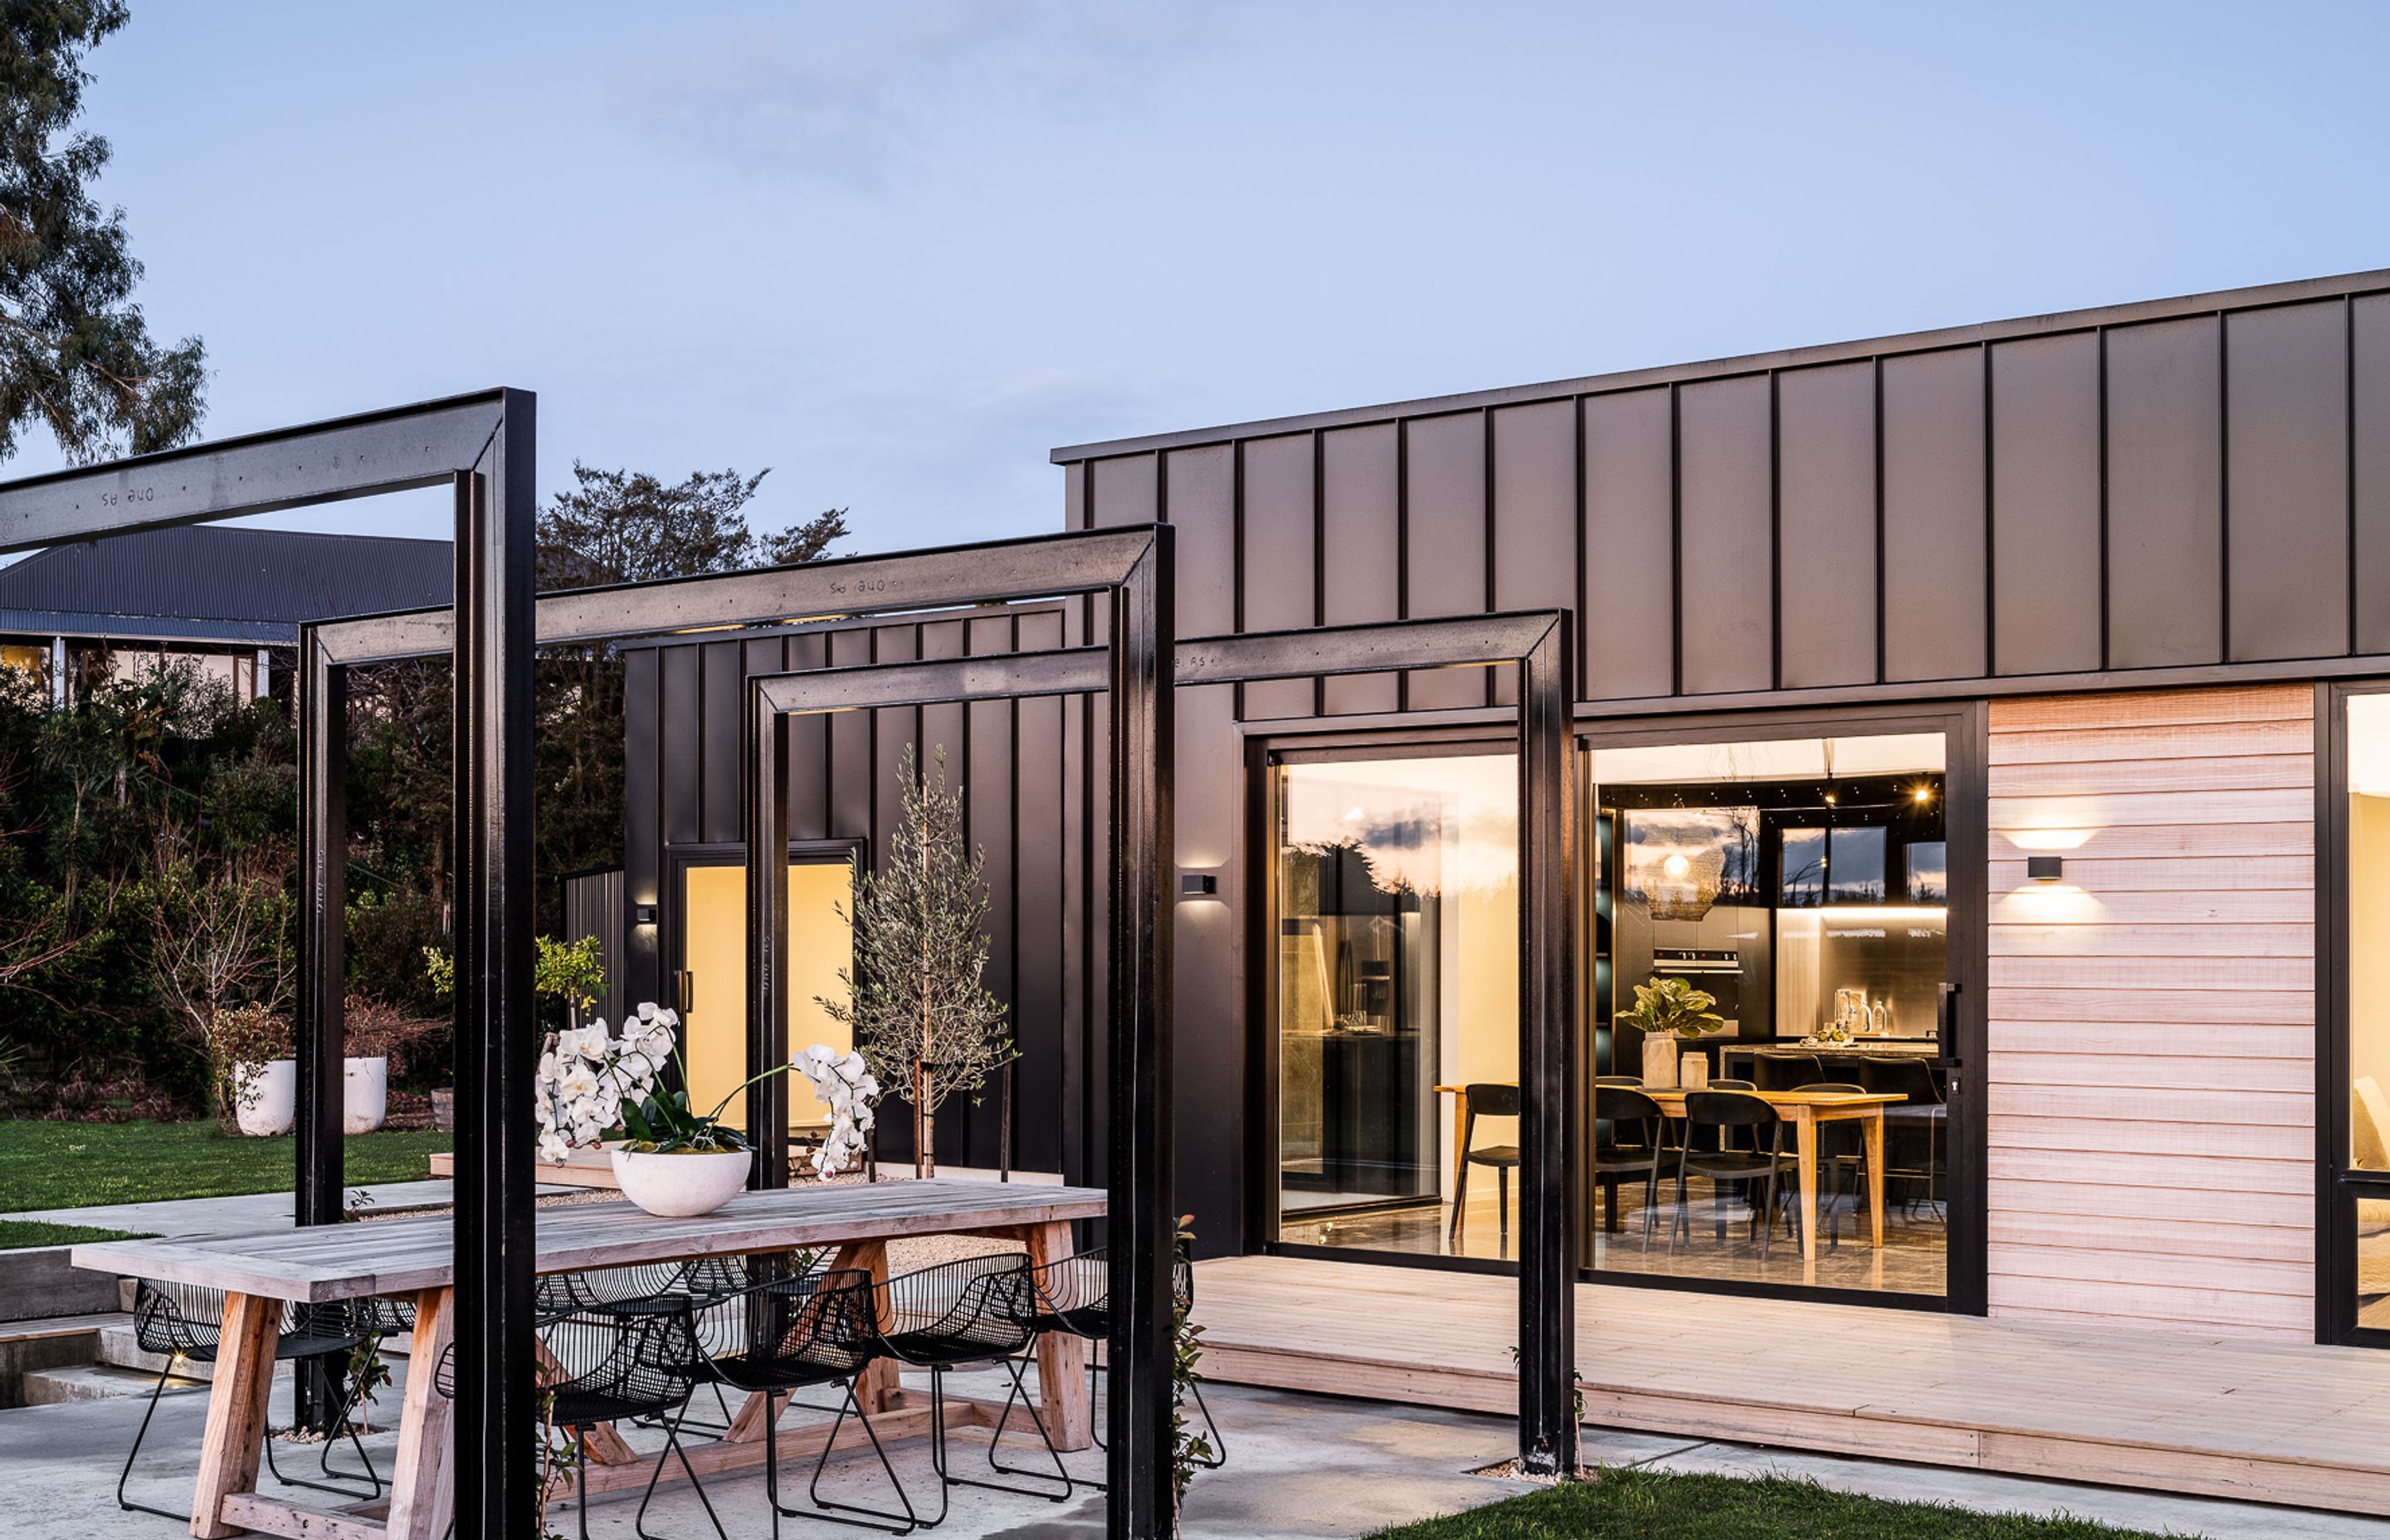 A stunning contemporary new-build using the popular dark tray cladding.